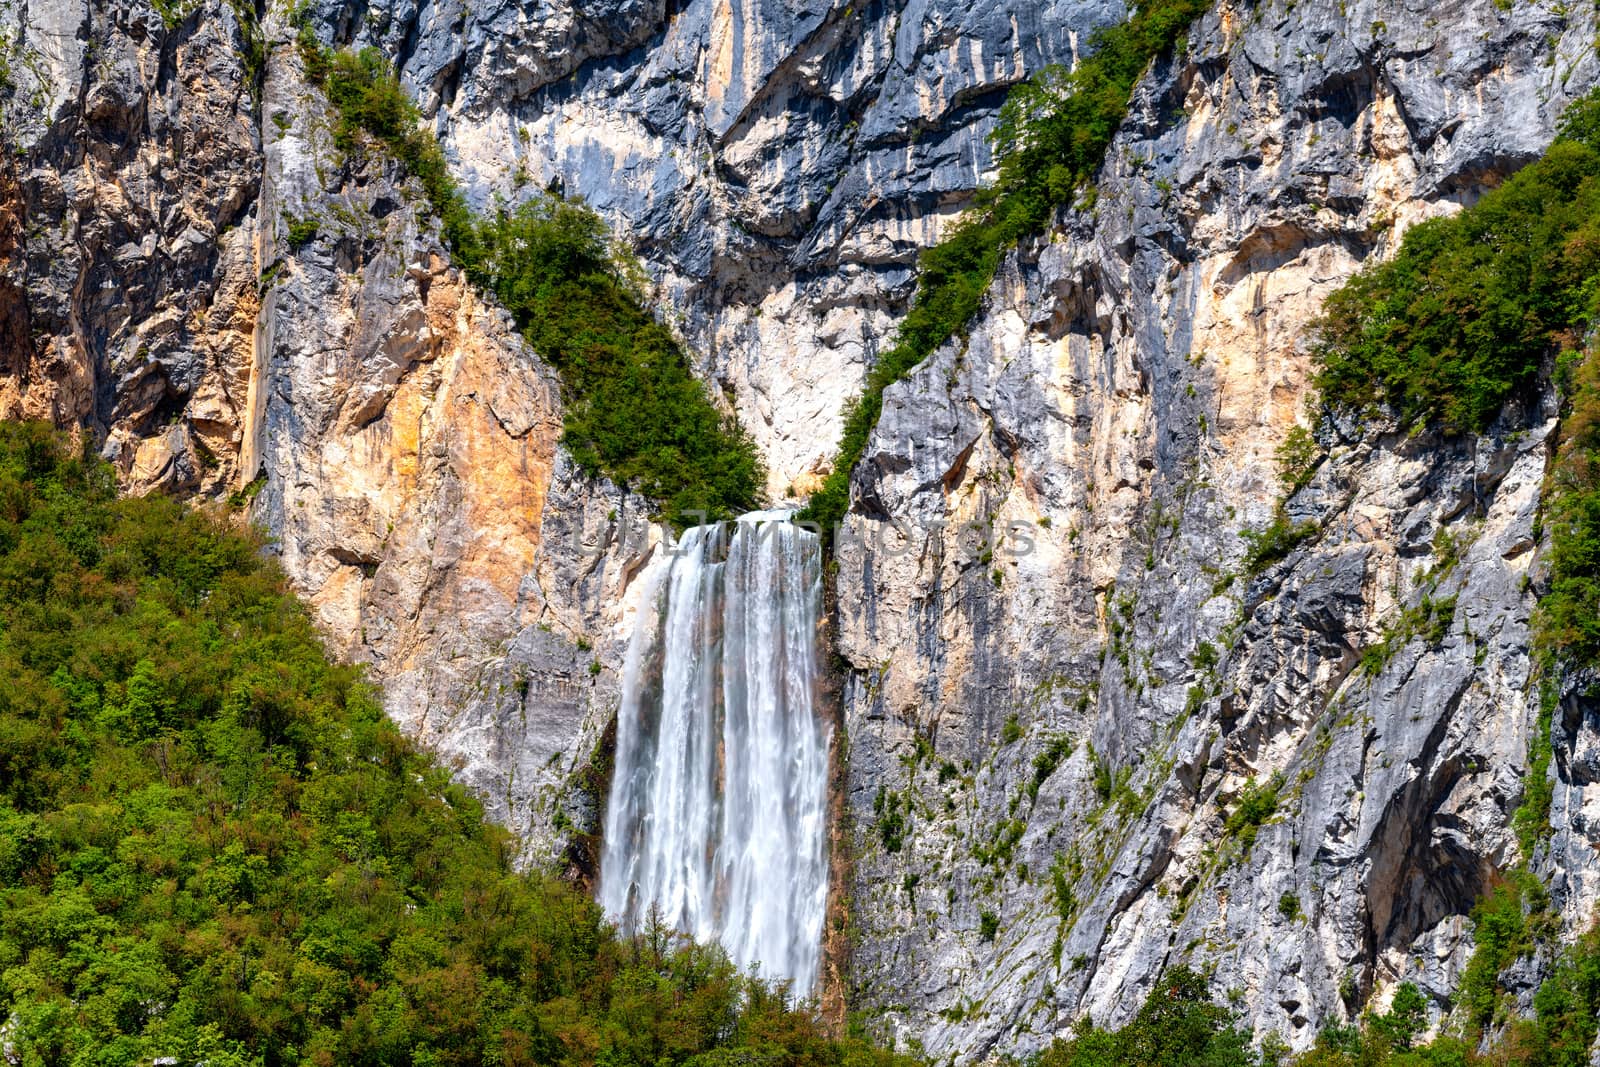 Magnificient waterfall Boka in Julian Alps in Triglav National park, Slovenia is one of the highest and most scenic waterfalls with 106m in height, rare view from Cezsoca, zoomed in, close, horizontal